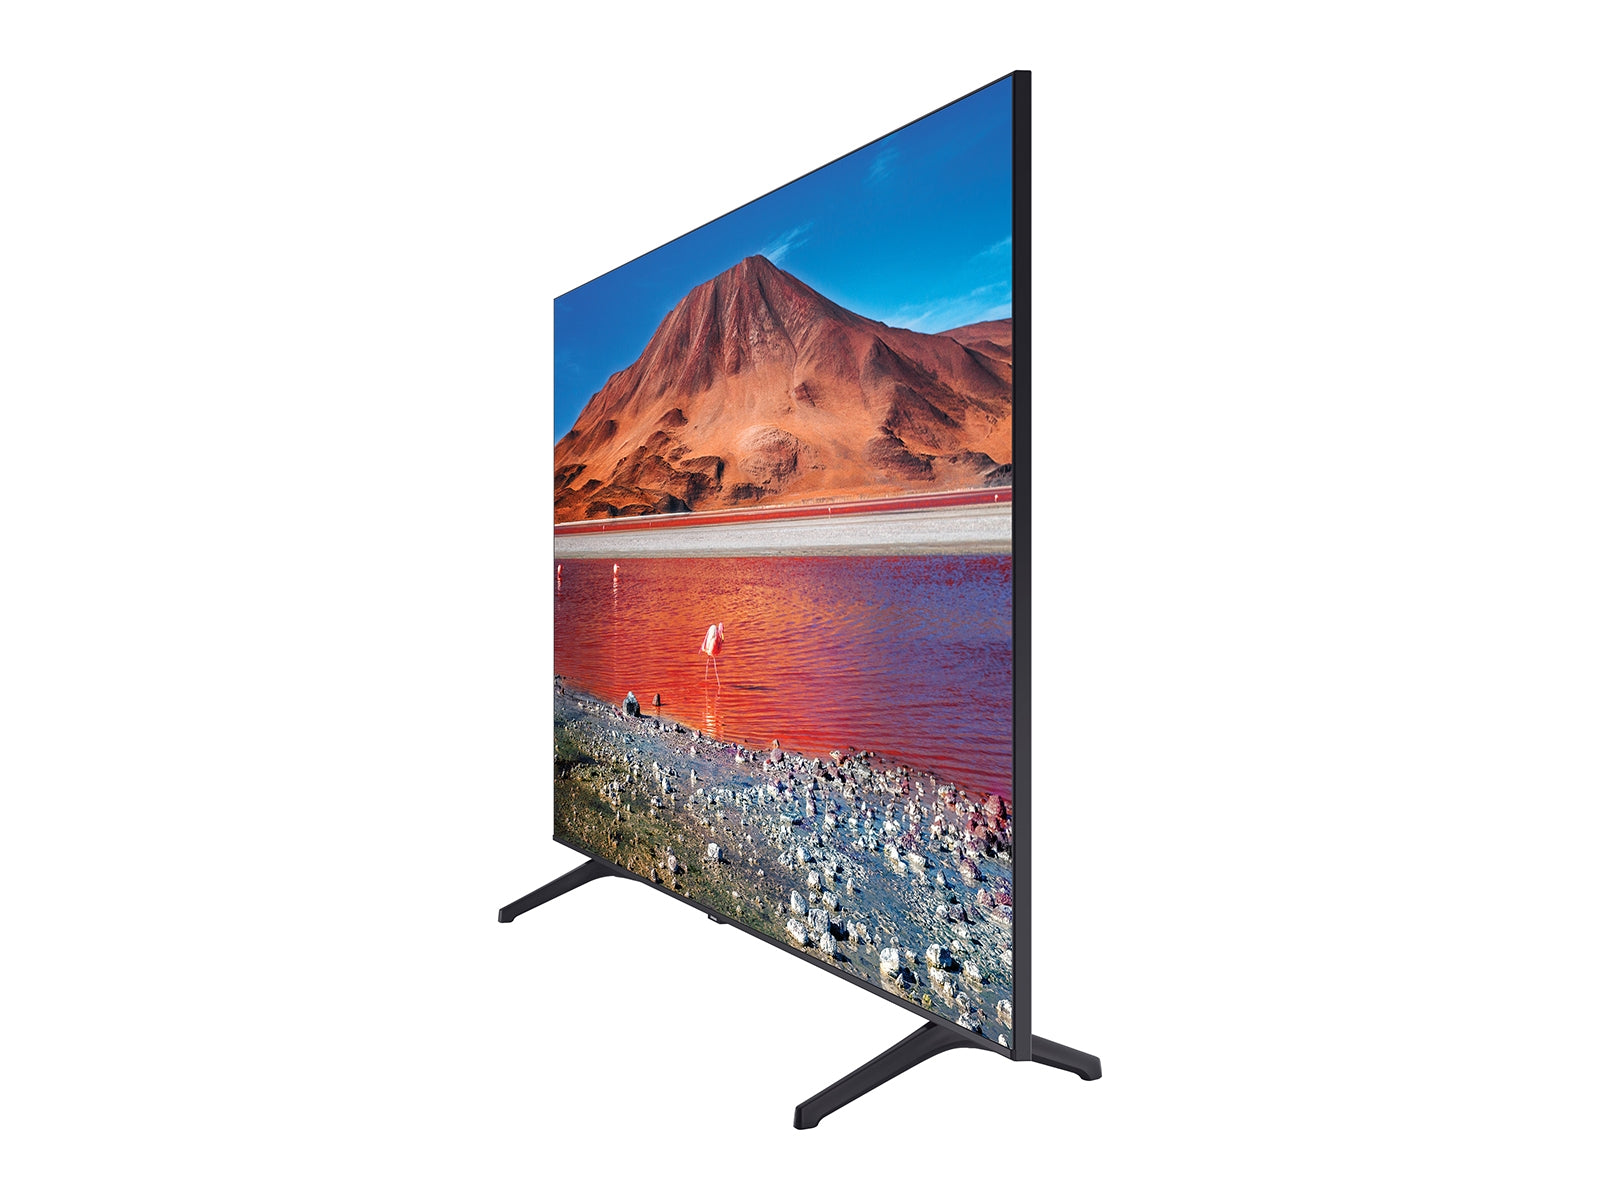 Samsung 55" Class 4K Crystal UHD HDR Smart TV(Refurbished) Tv's ONLY for delivery in San Diego and Tijuana